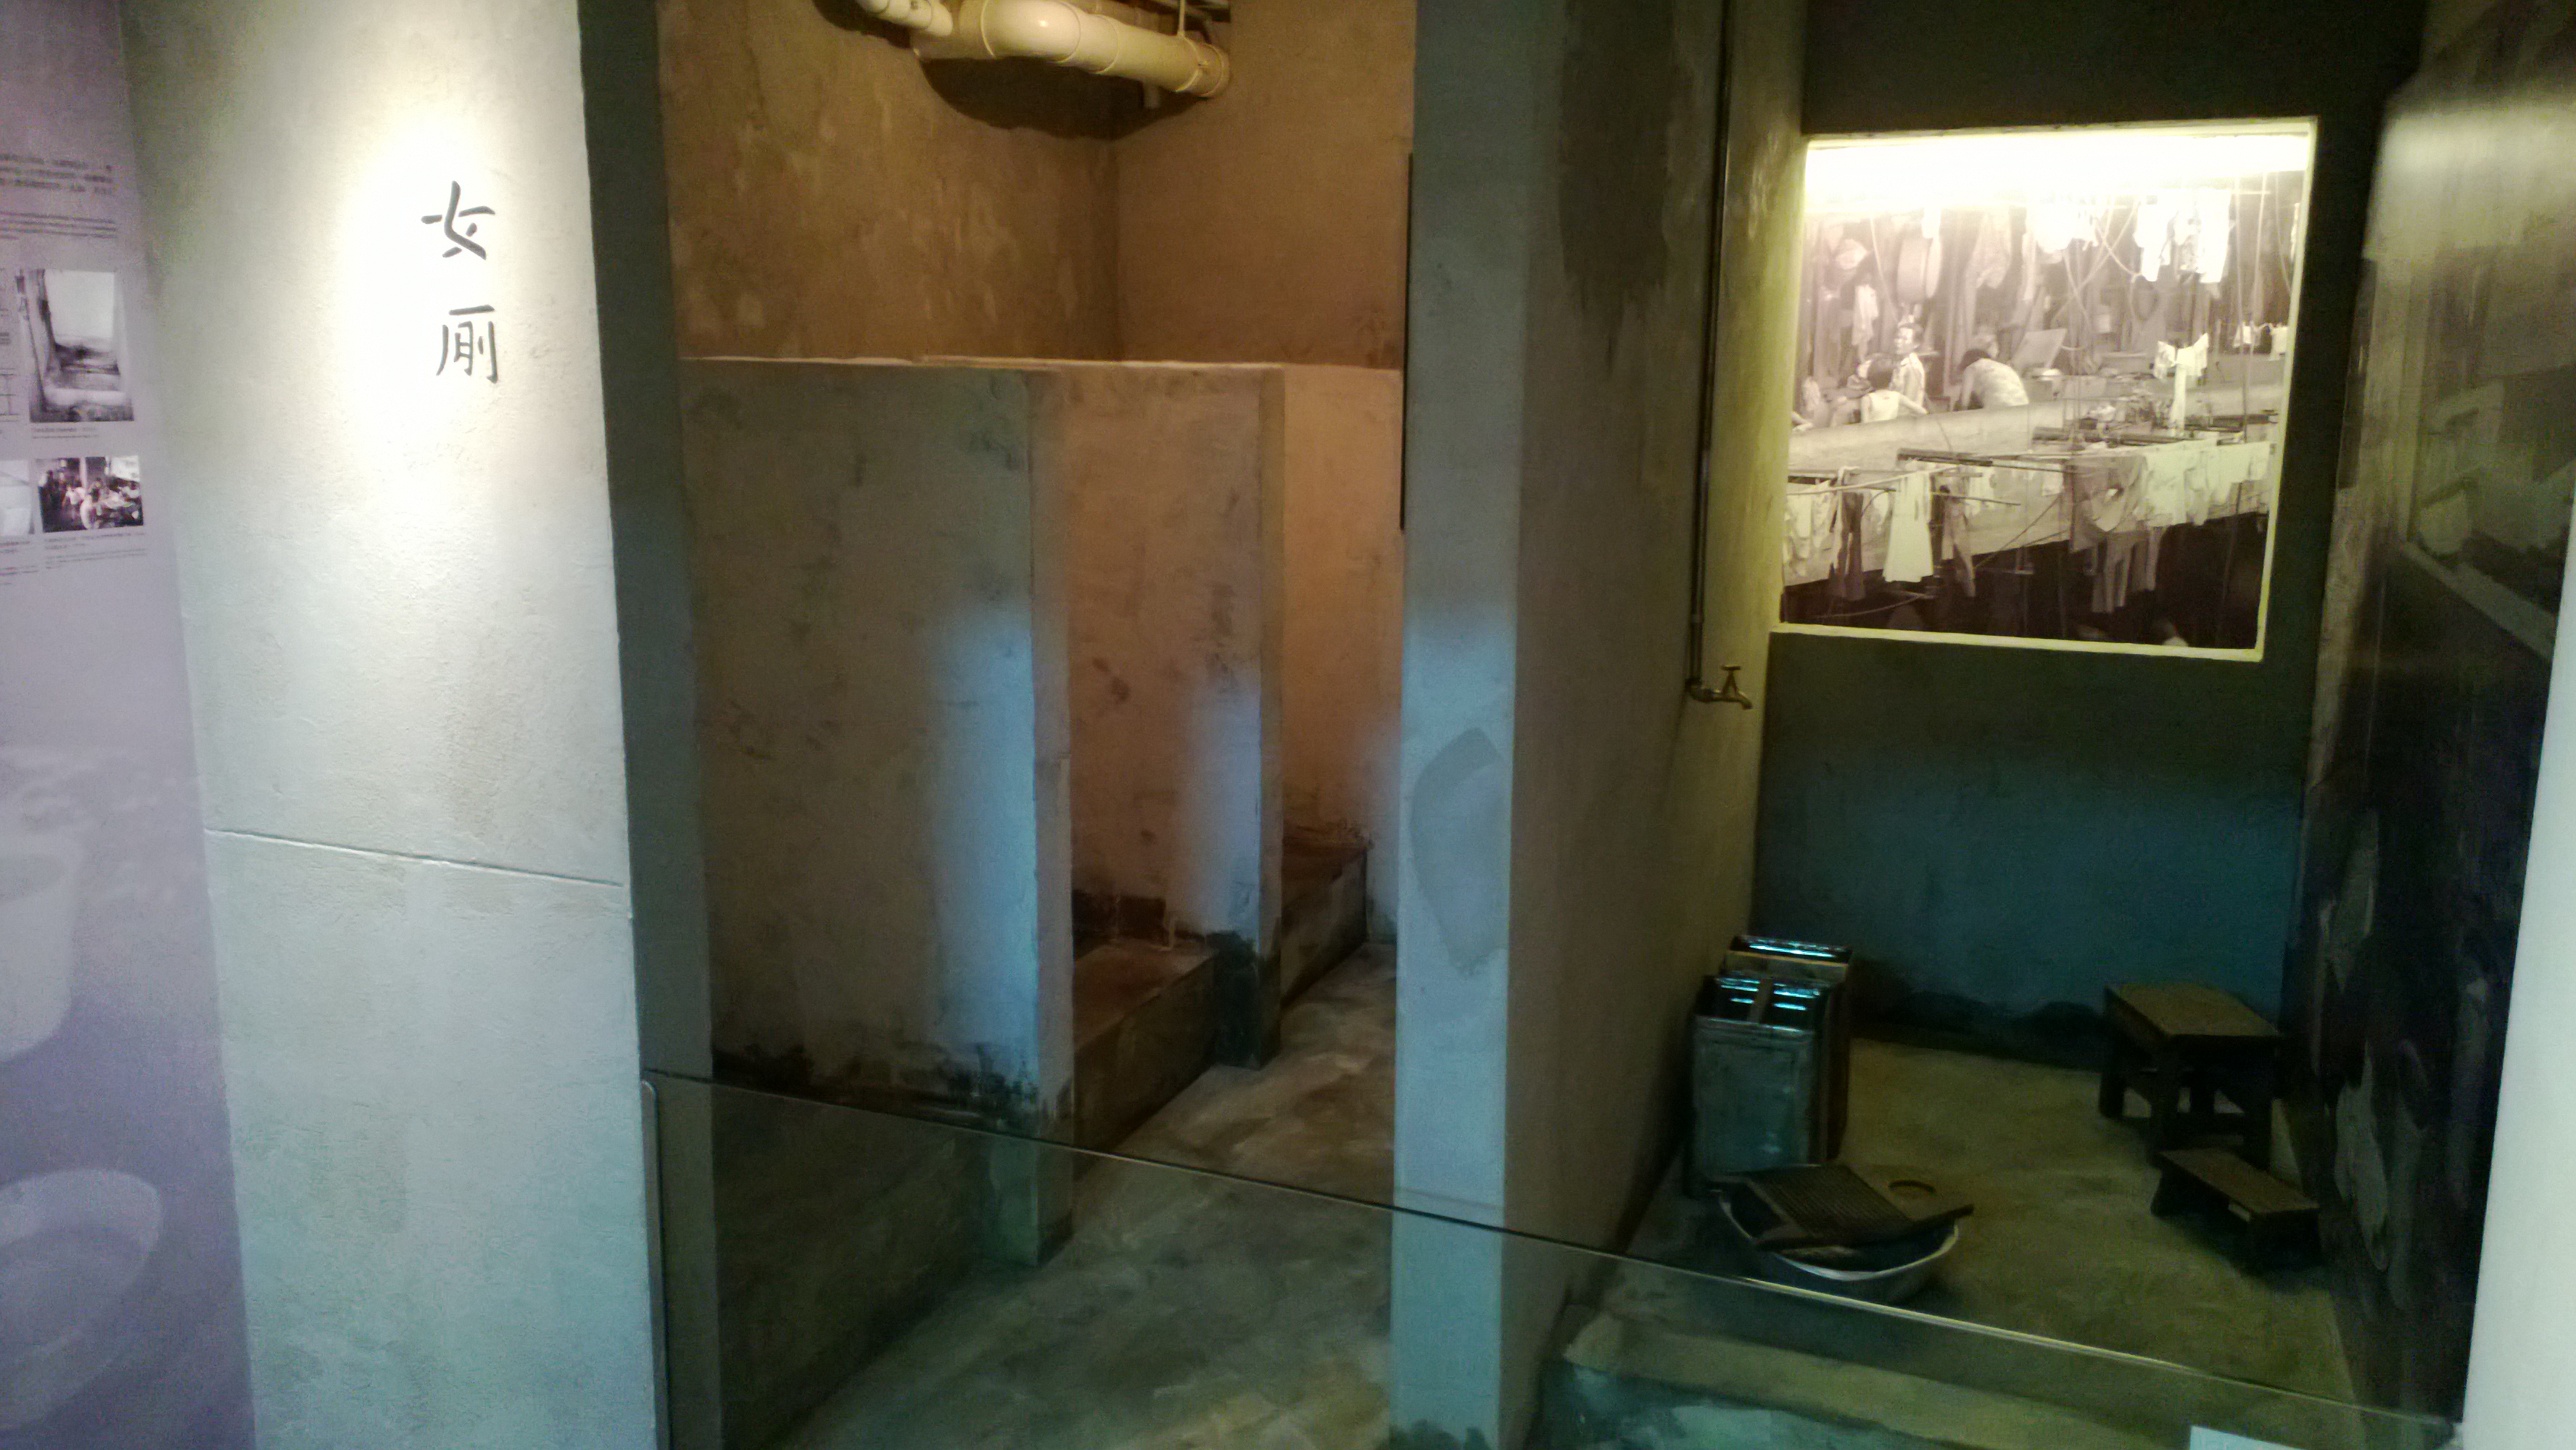 People shared the public washroom at Mei Ho House in the past